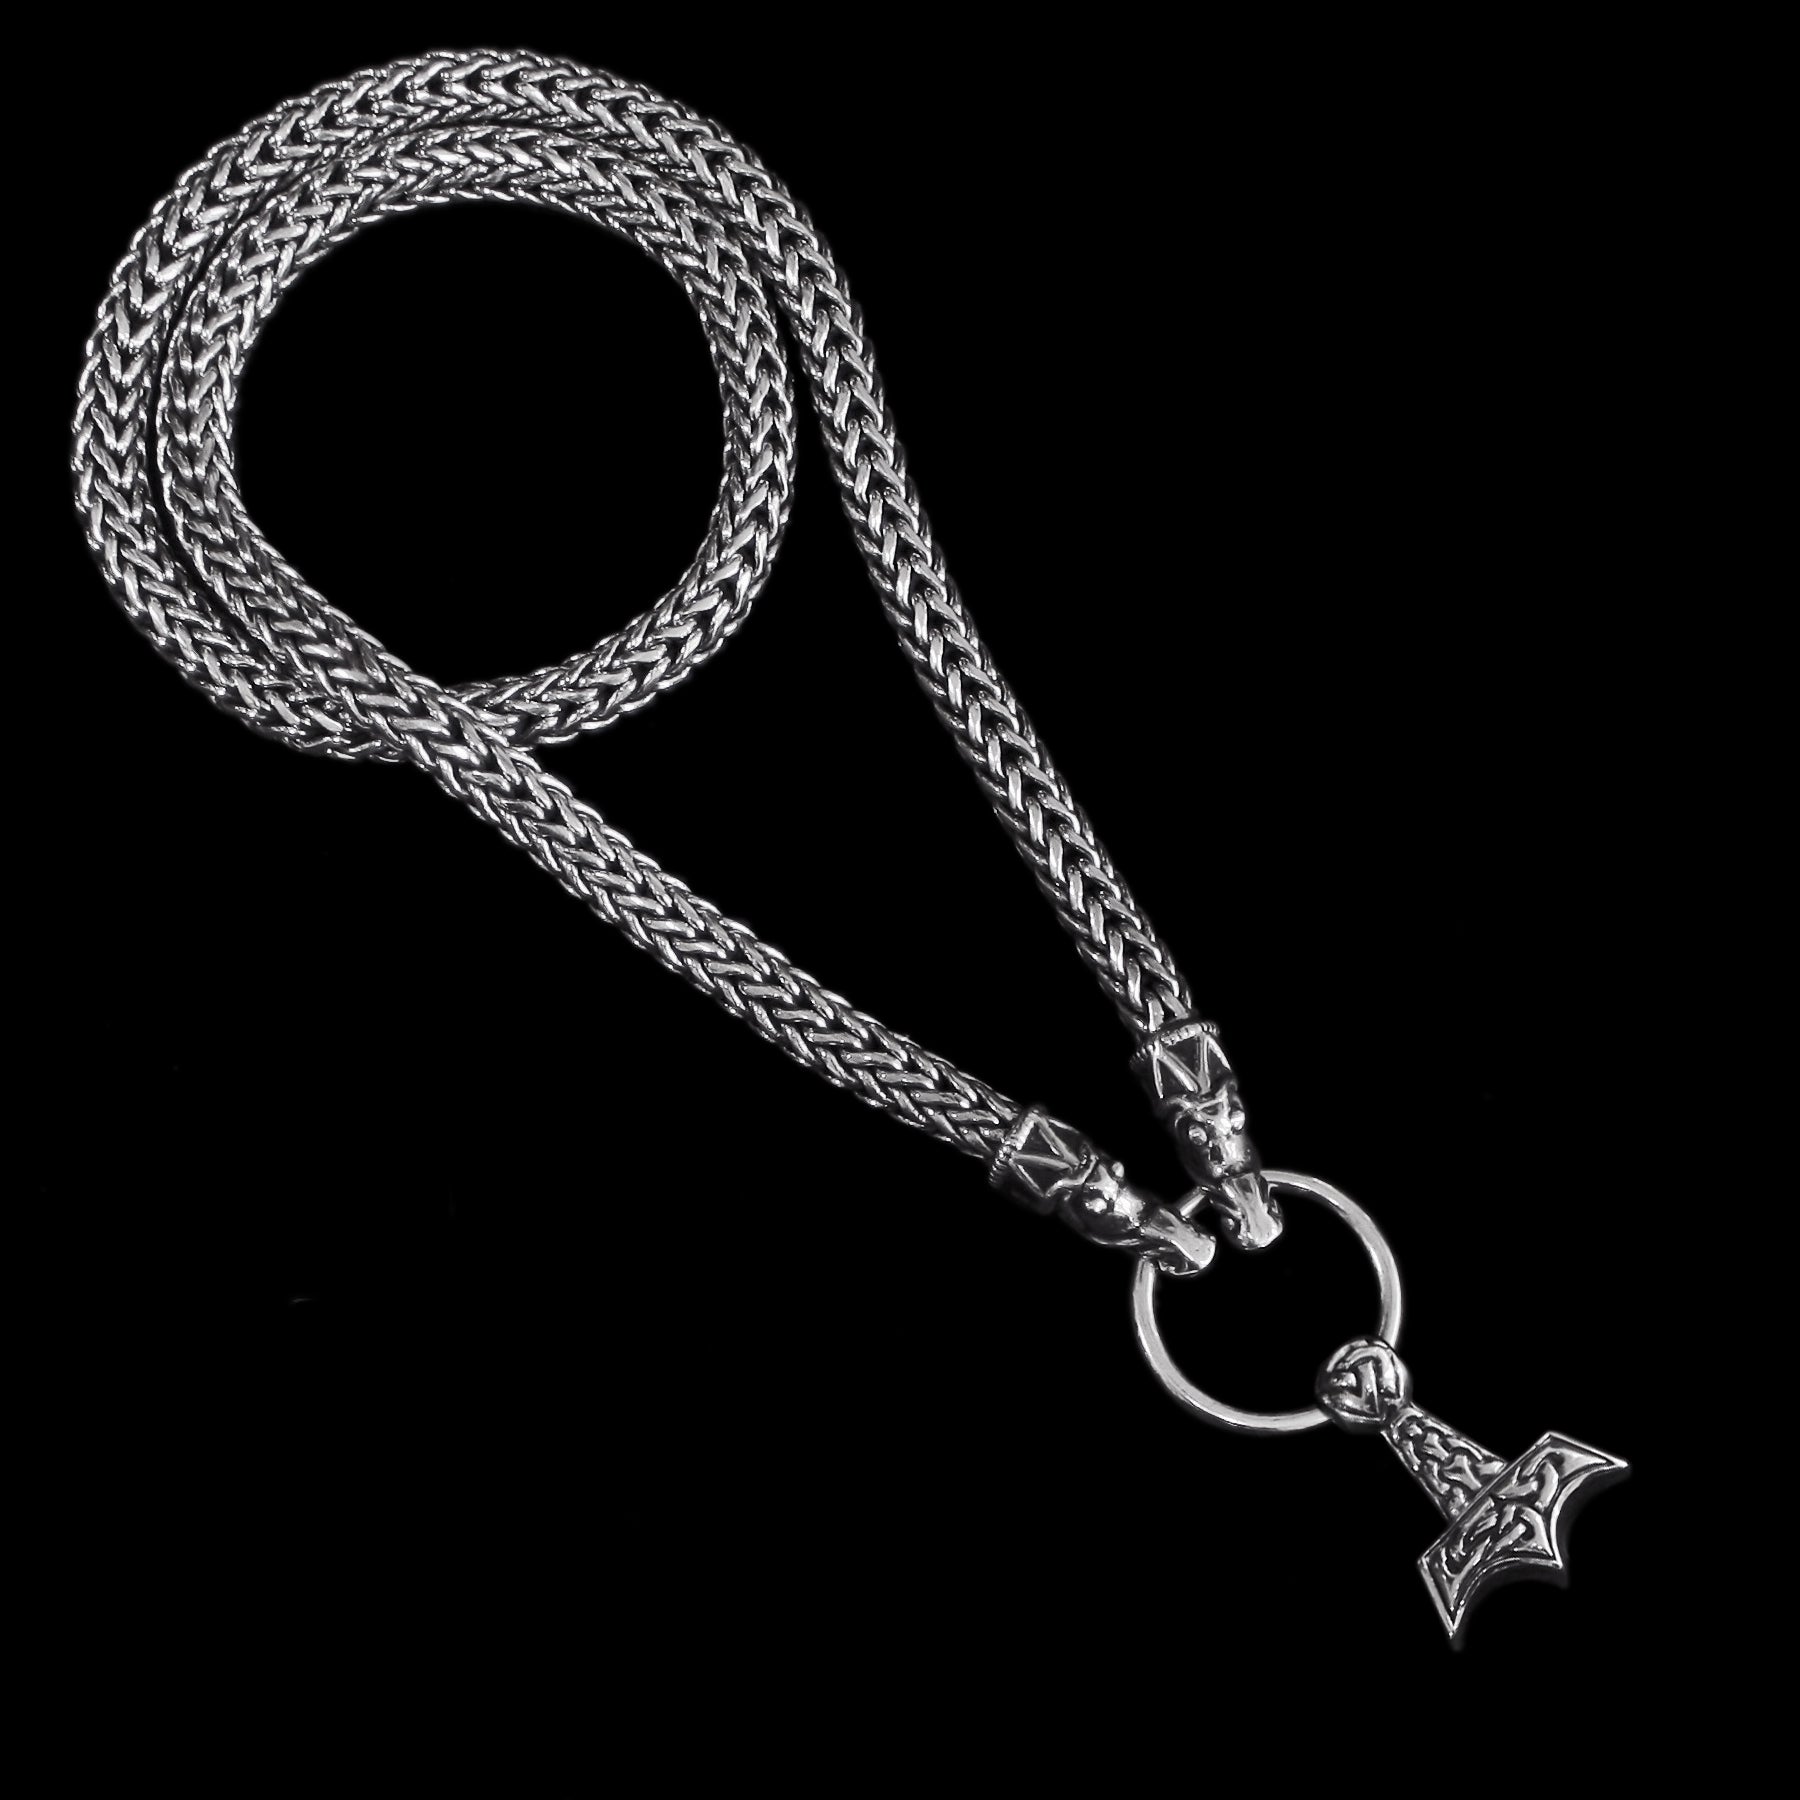 8mm Thick Silver Snake Chain Thors Hammer Necklace - Gotland Dragon Heads - Splt Ring - Knotwork Thors Hammer